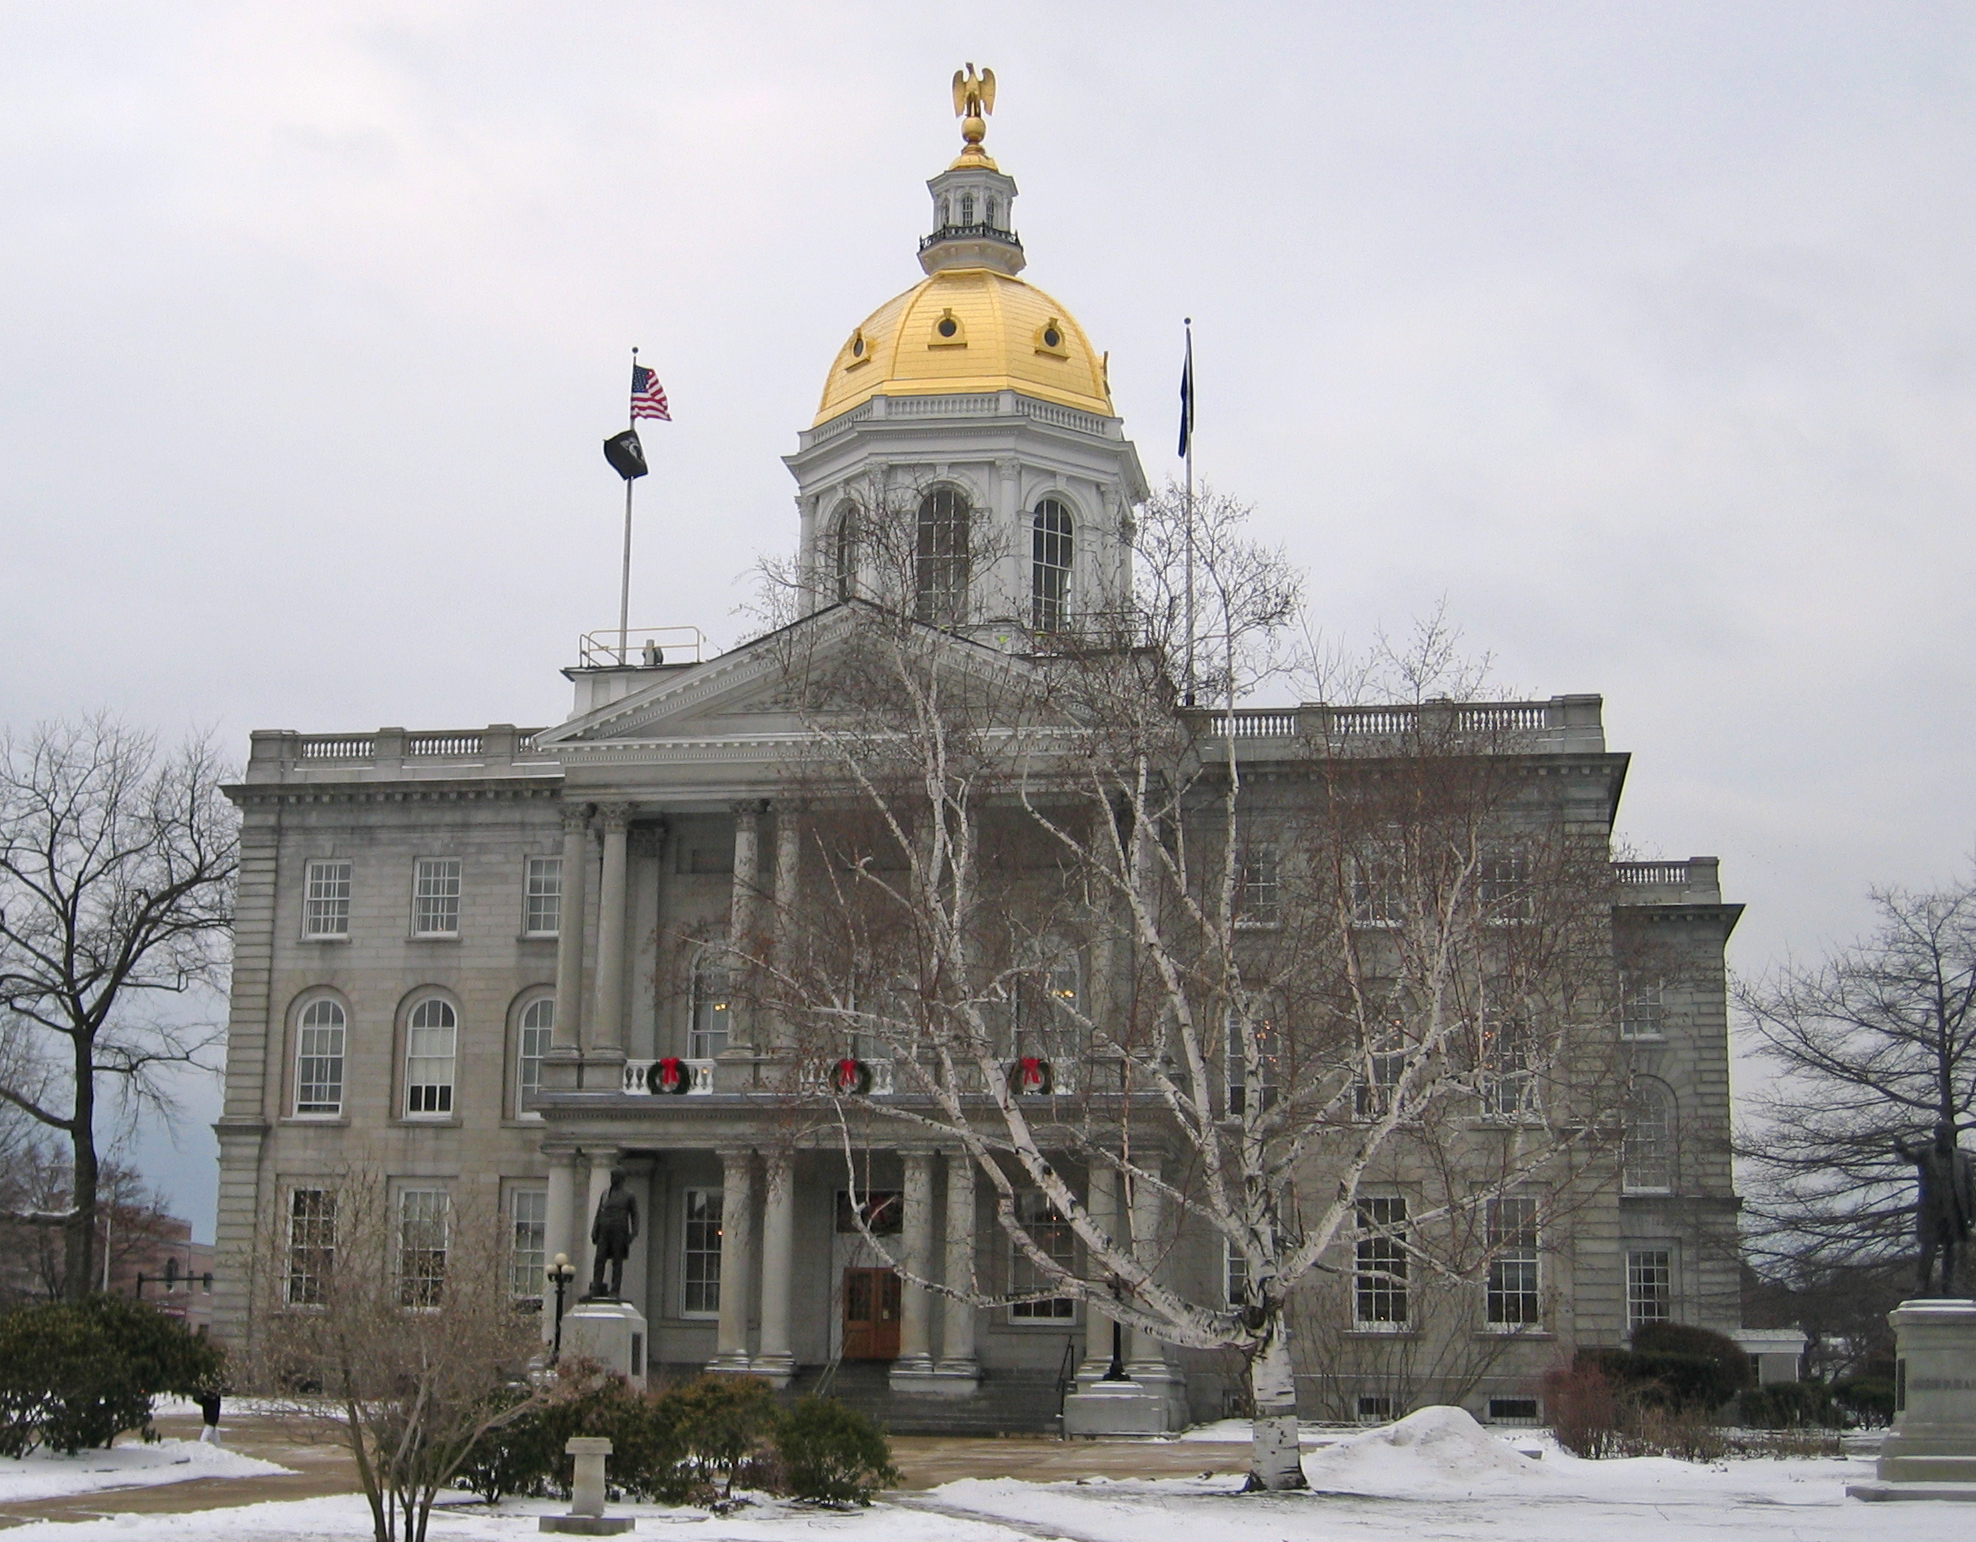 Concord, New Hampshire State House. The building was built by Stuart J. Park from granite quarried from Concord, New Hampshire. Construction began 1816 and was completed in 1819. Photo taken by Jared C. Benedict on December 29, 2004.